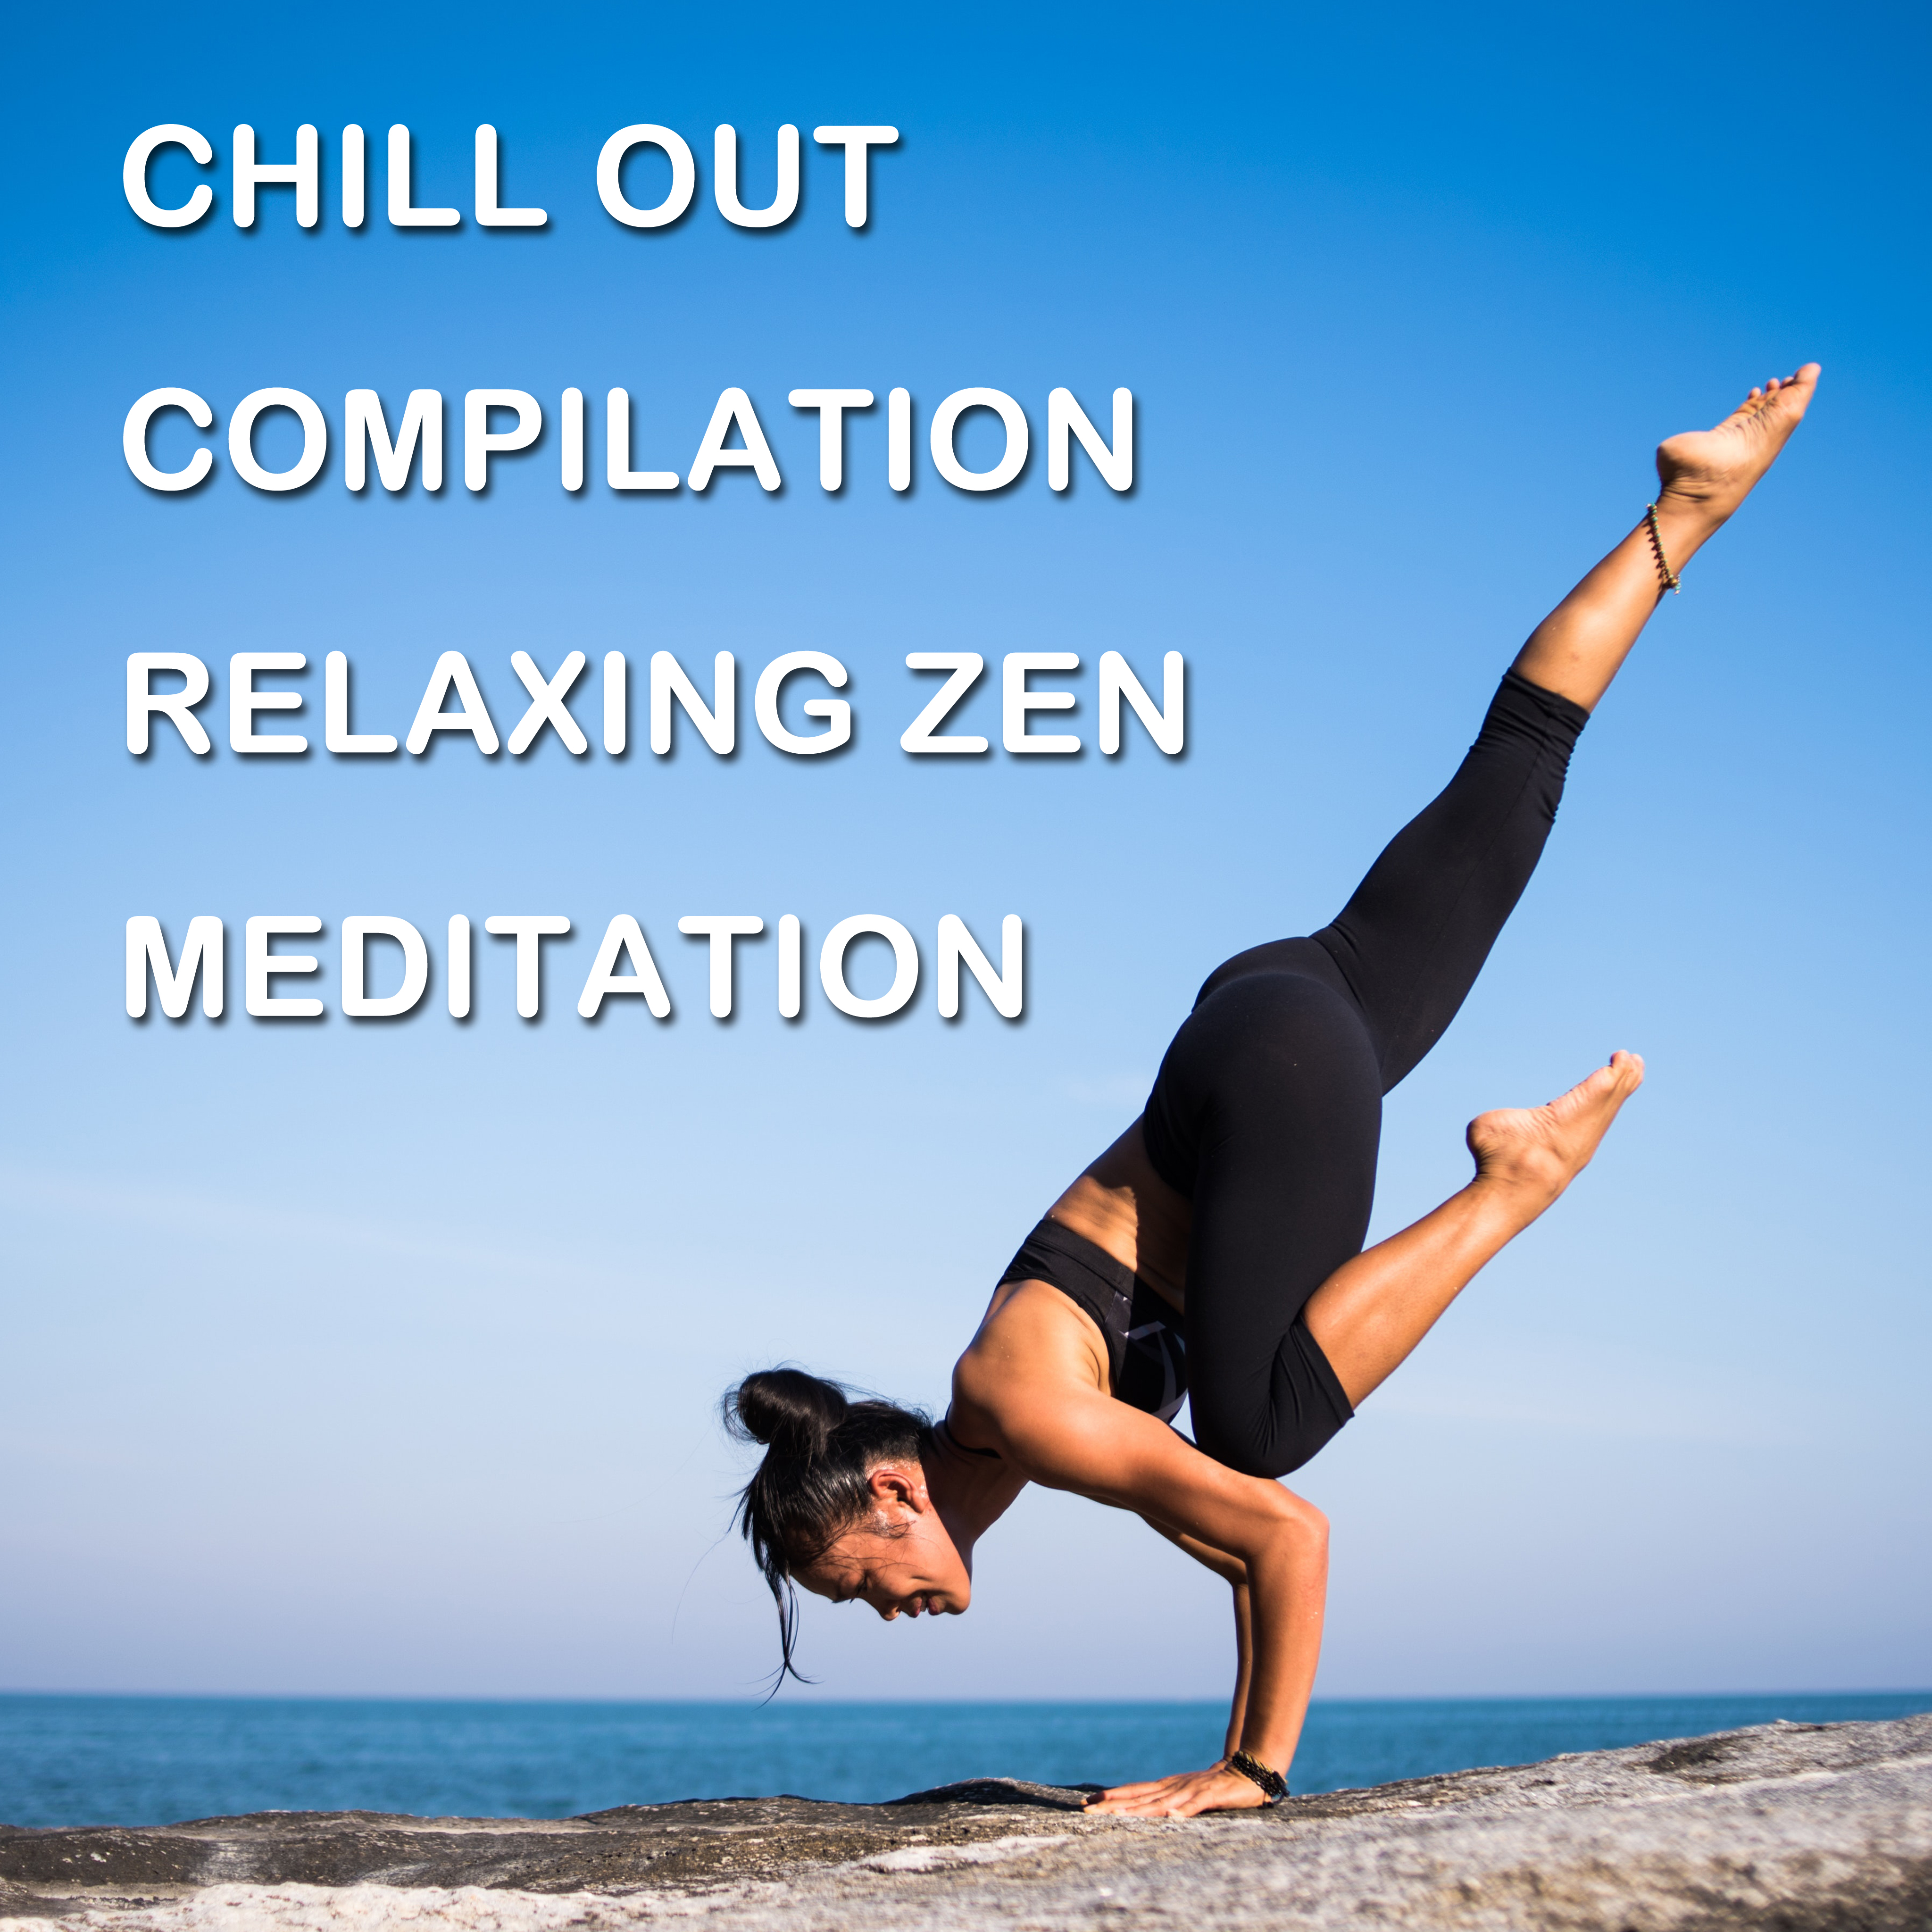 2018 Chill Out Compilation - Relaxing Zen Meditation